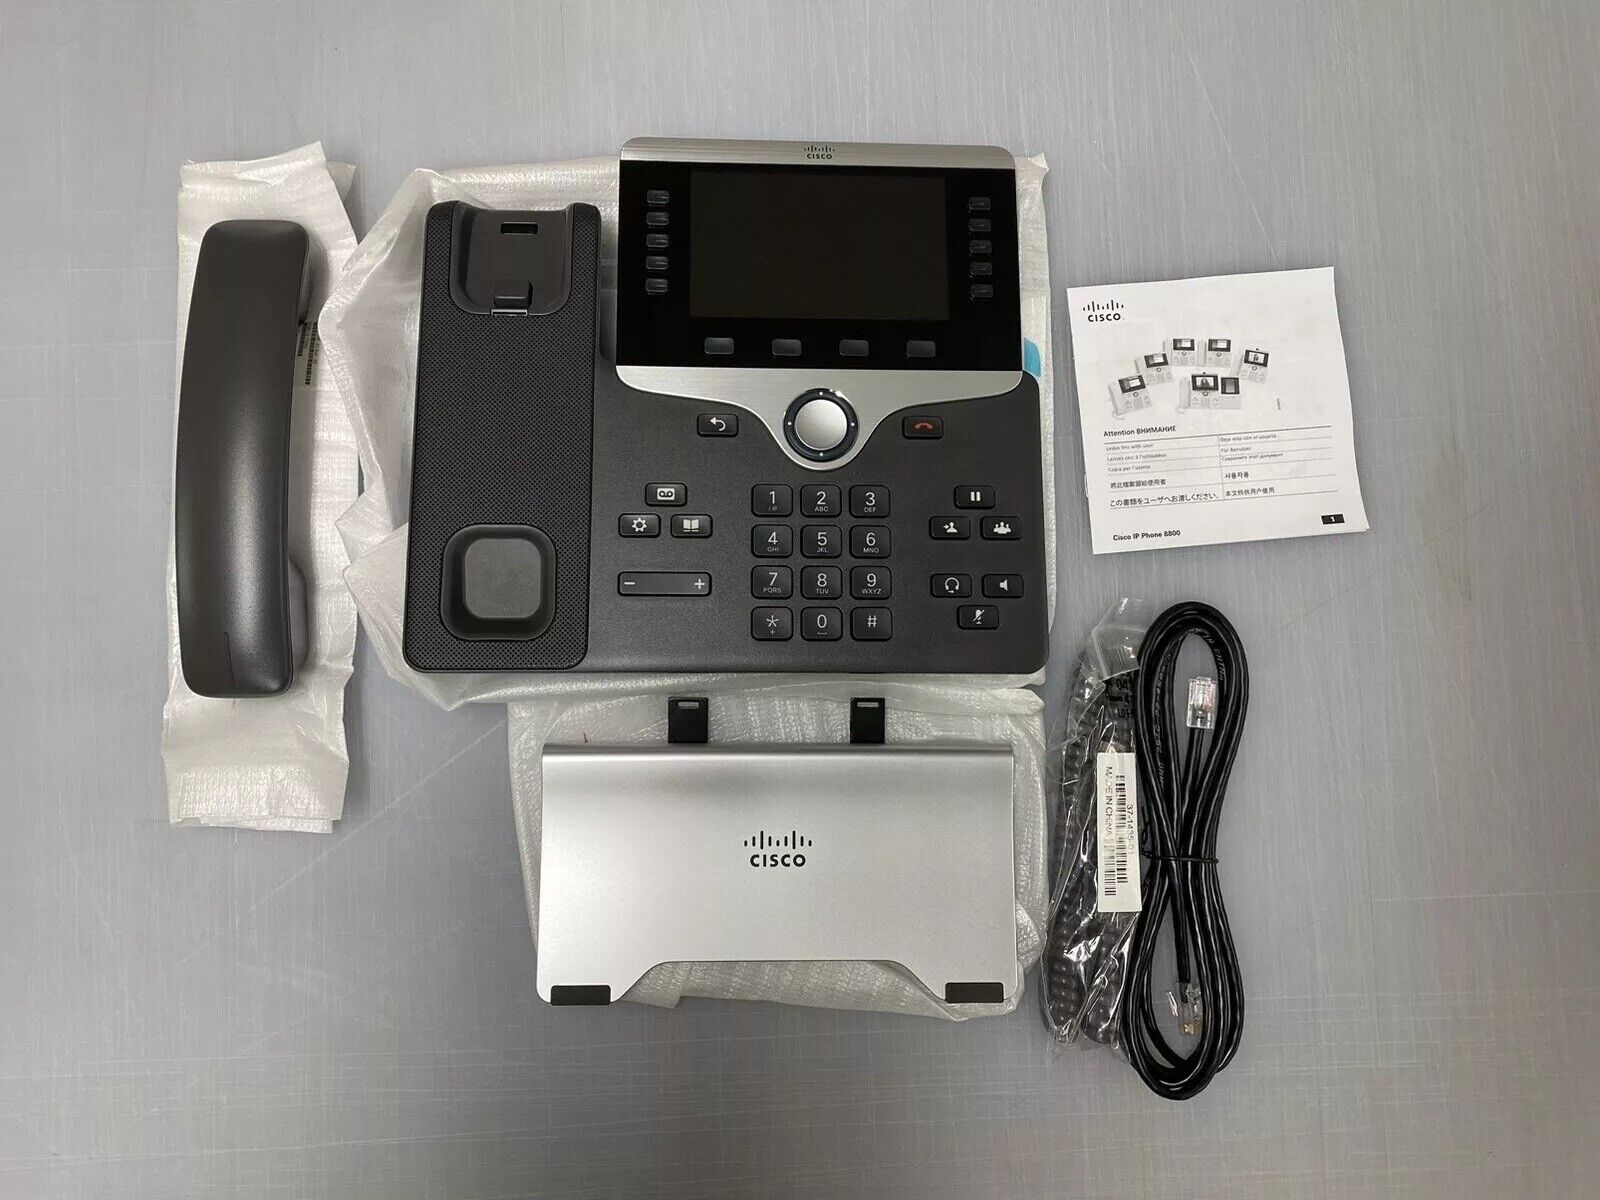 Cisco CP-8841-K9 5-Lines Corded VoIP Phone - Black